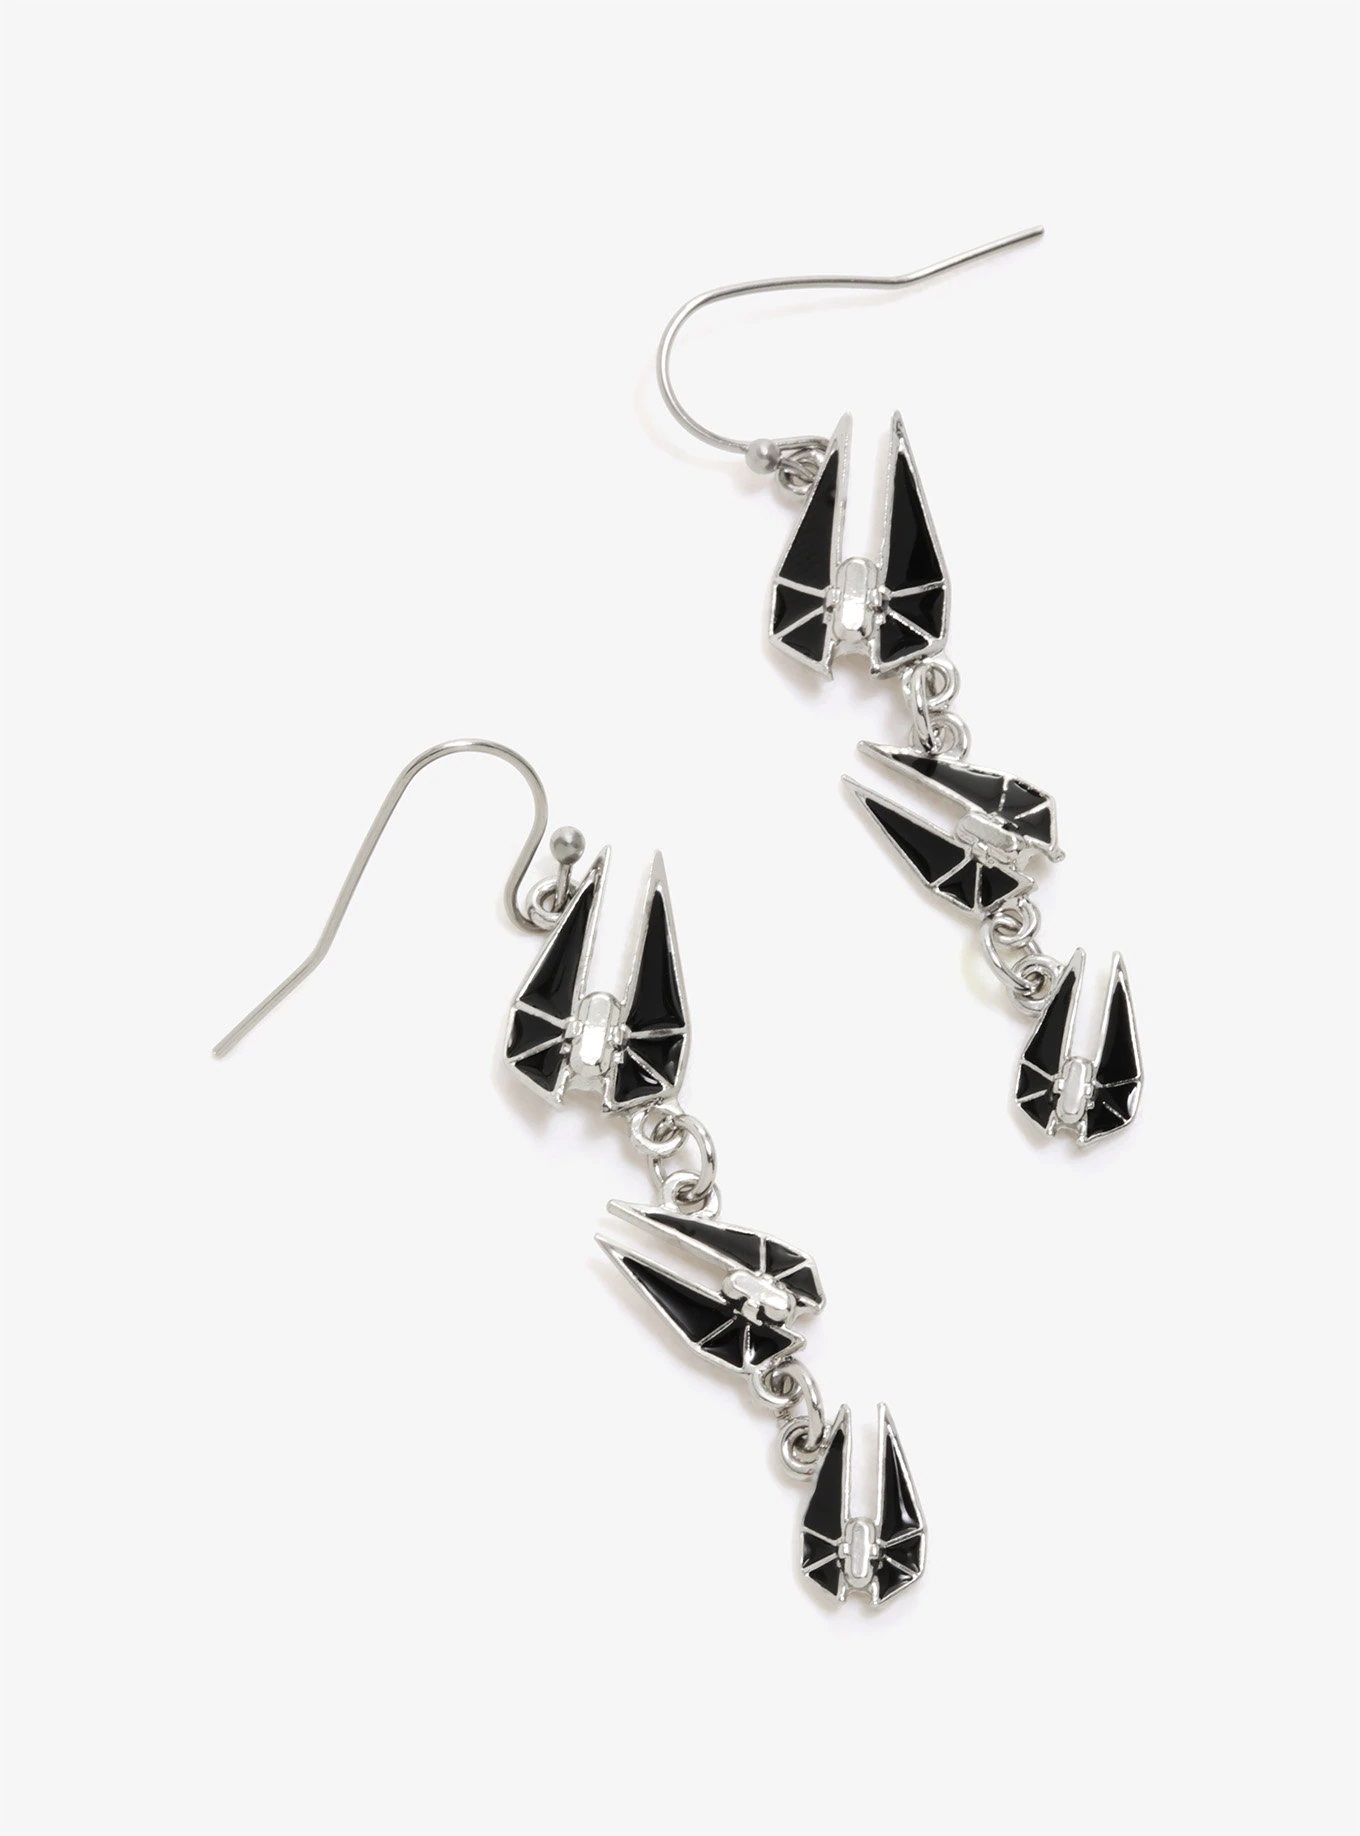 Body Vibe x Star Wars Starfighter Dangle Earrings at Box Lunch